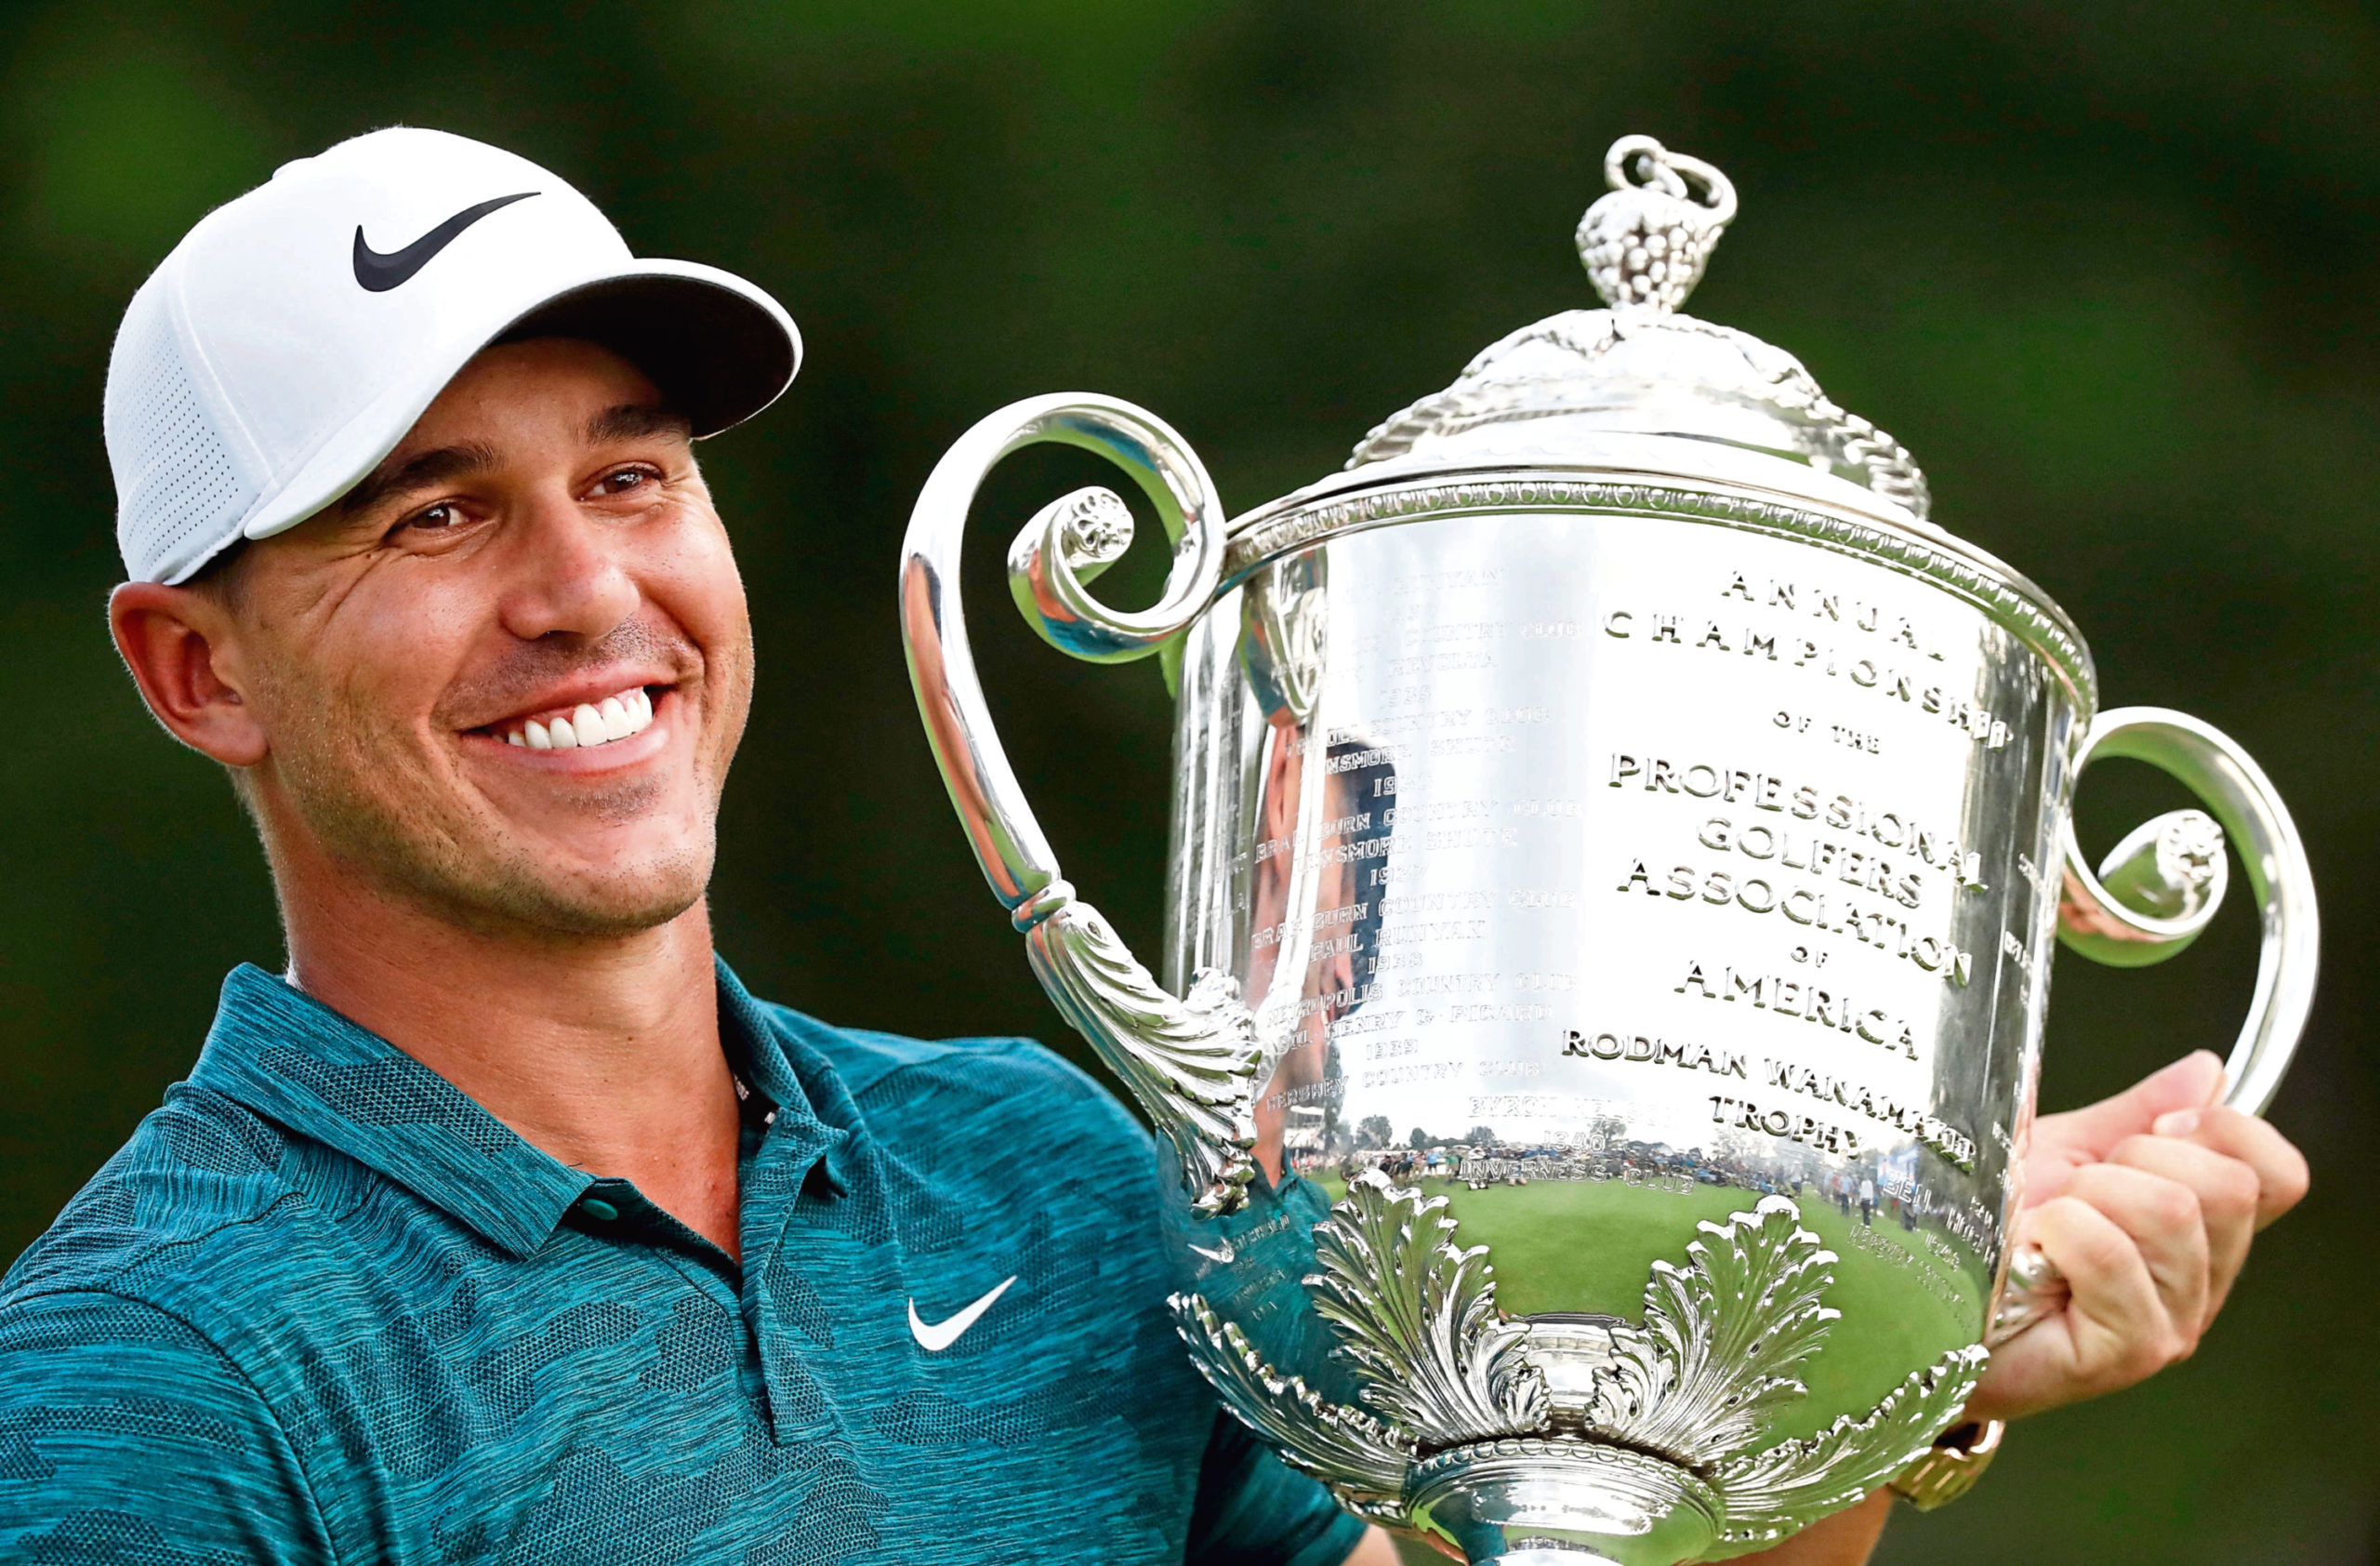 Brooks Koepka holds the Wanamaker Trophy after he won the PGA Championship golf tournament at Bellerive Country Club, Sunday, Aug. 12, 2018, in St. Louis. (AP Photo/Brynn Anderson)